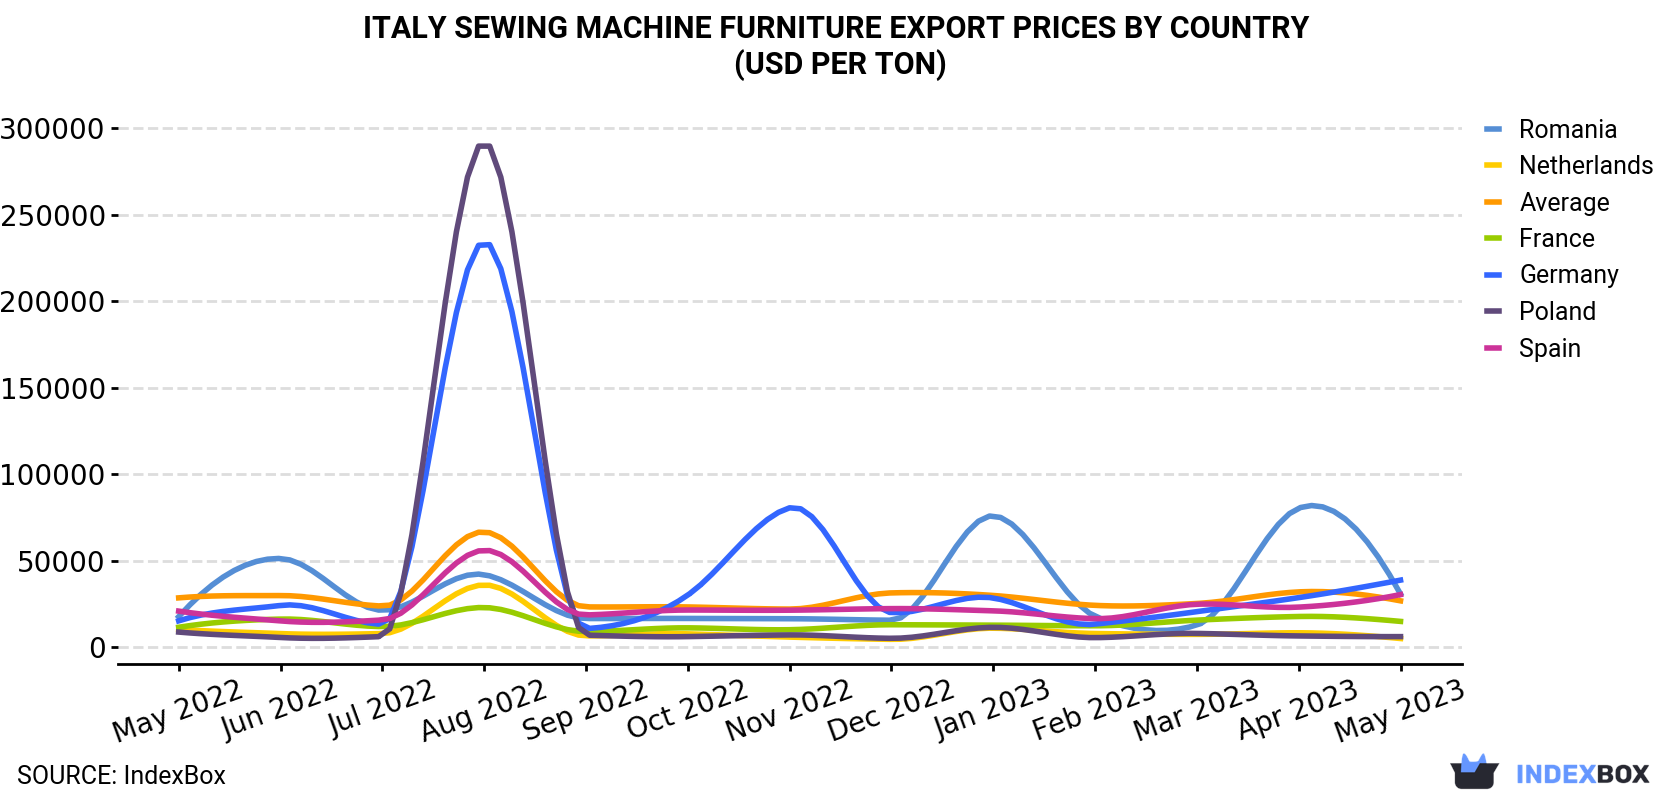 Italy Sewing Machine Furniture Export Prices By Country (USD Per Ton)